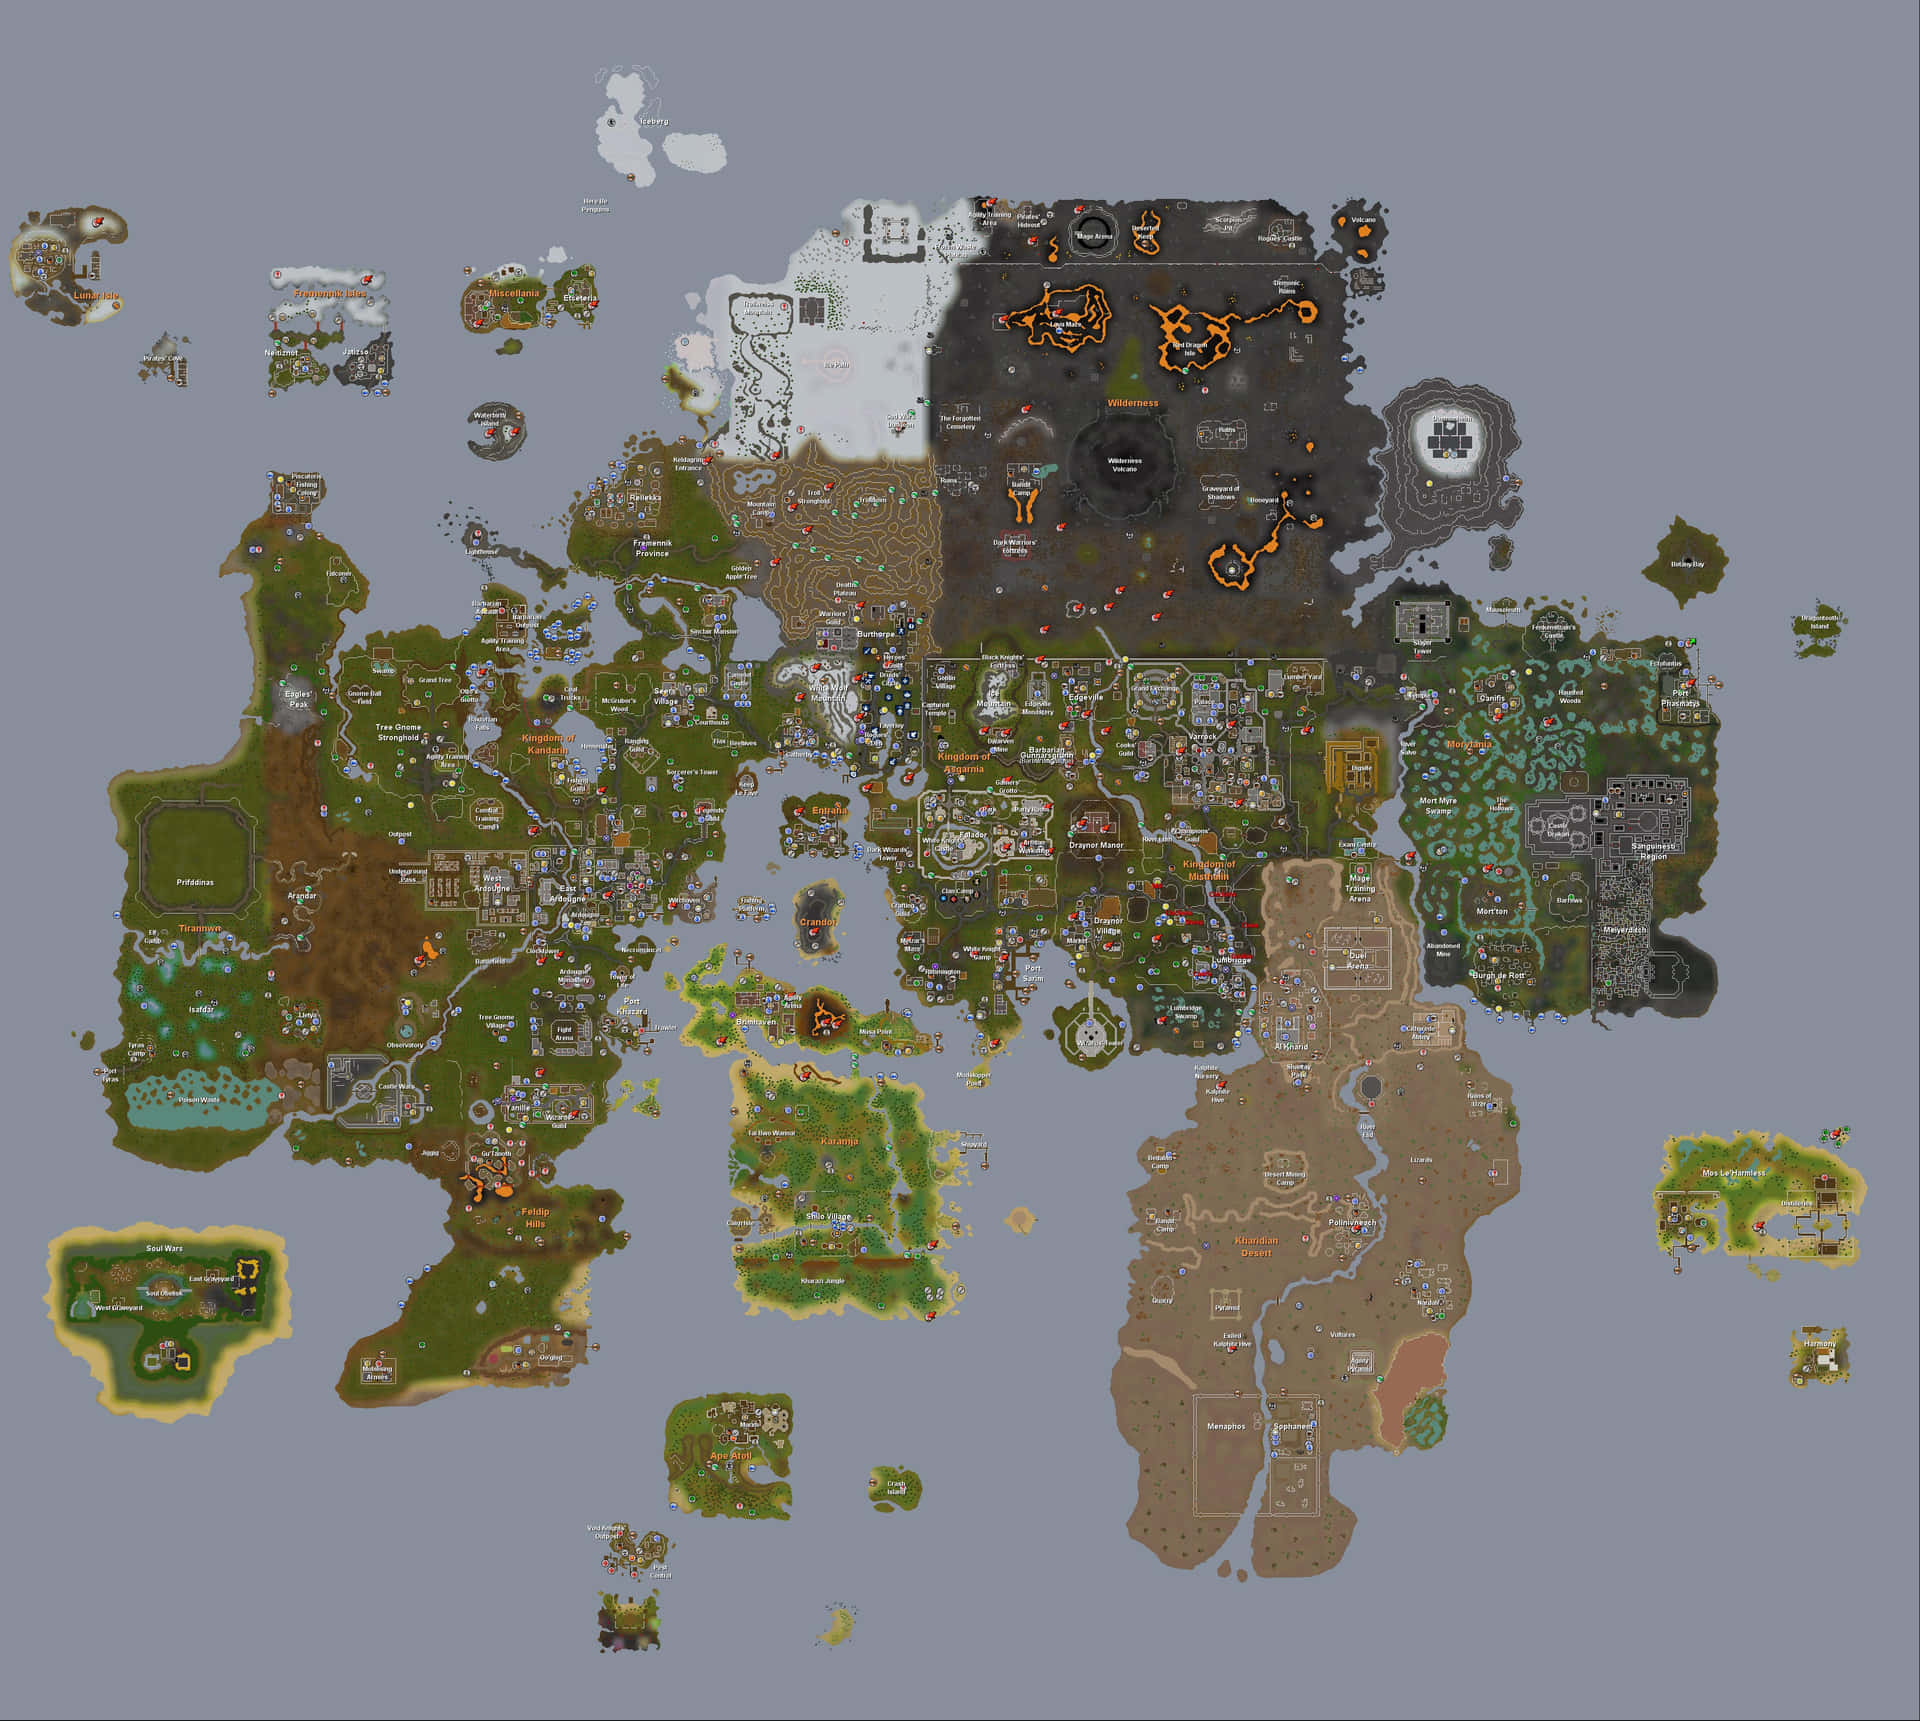 The world of Old School RuneScape awaits.